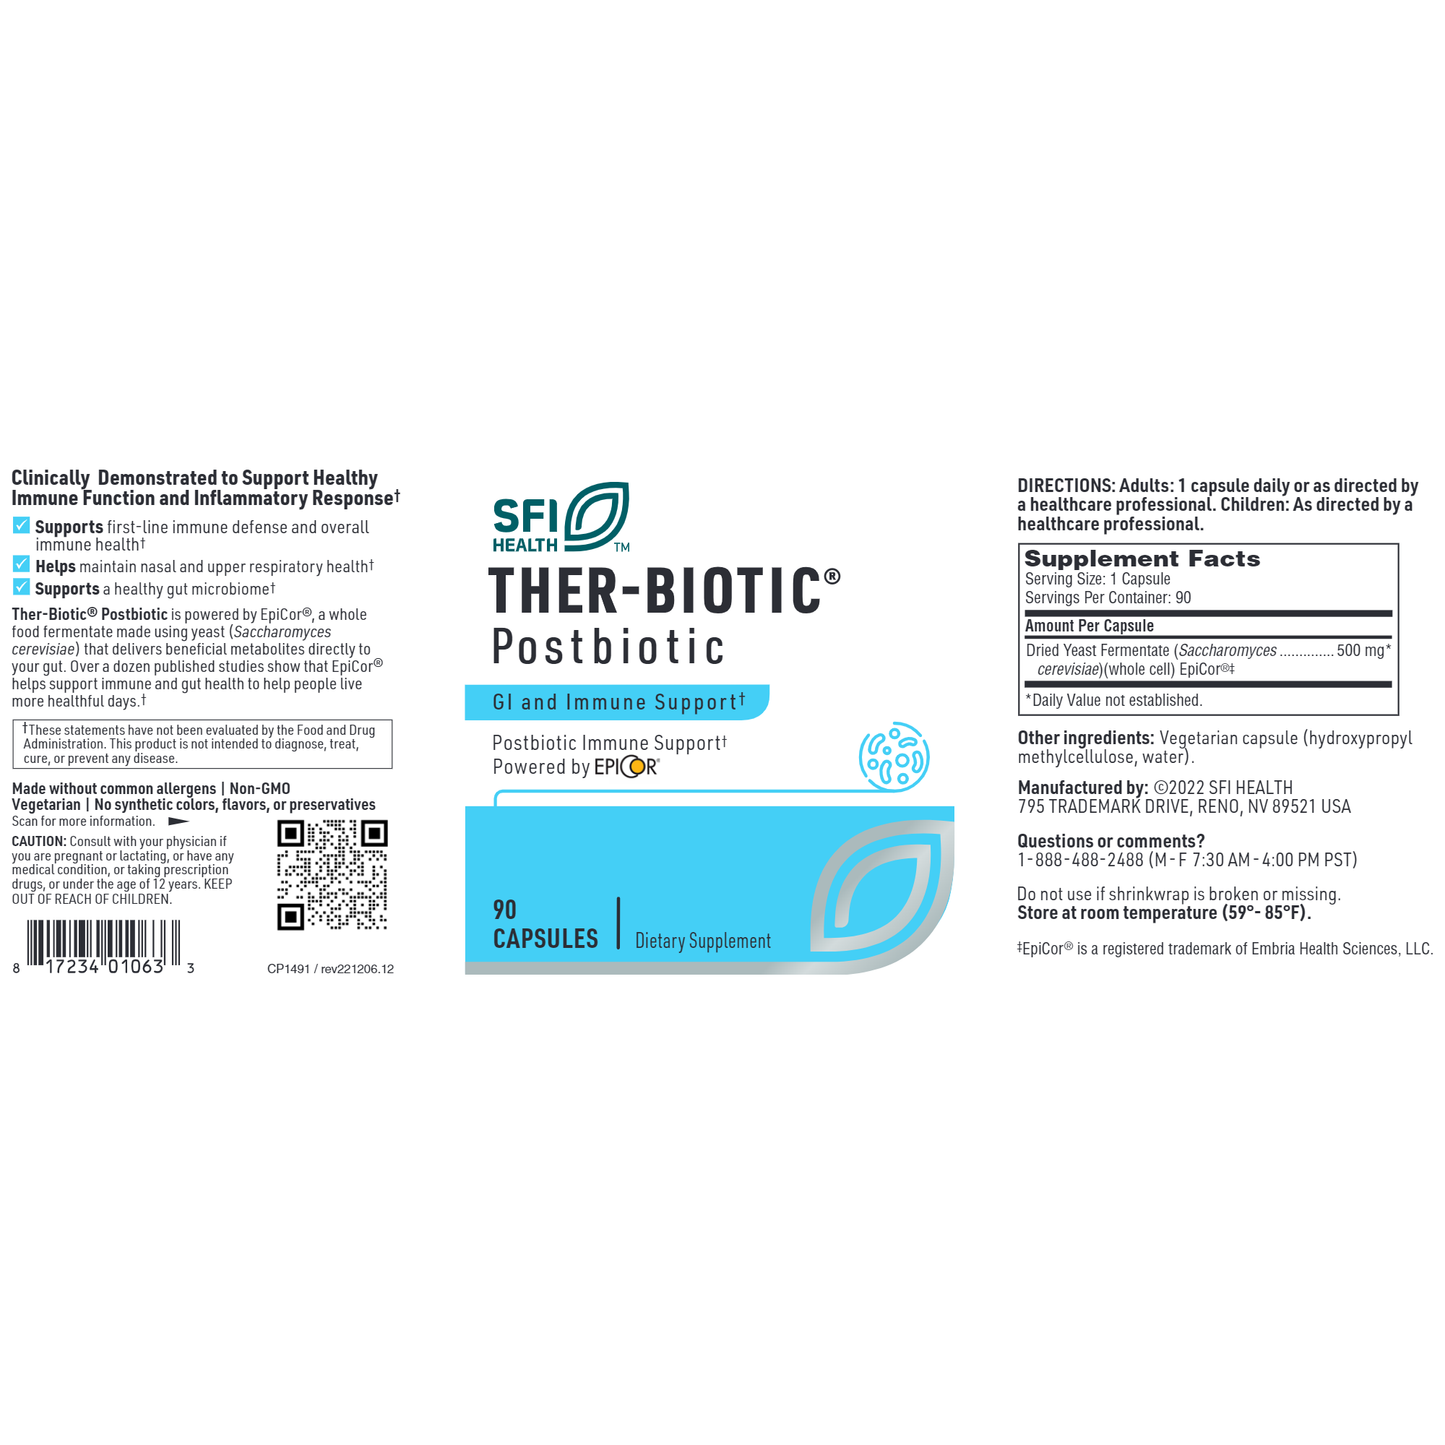 Ther-Biotic Postbiotic (previously EpiCor)